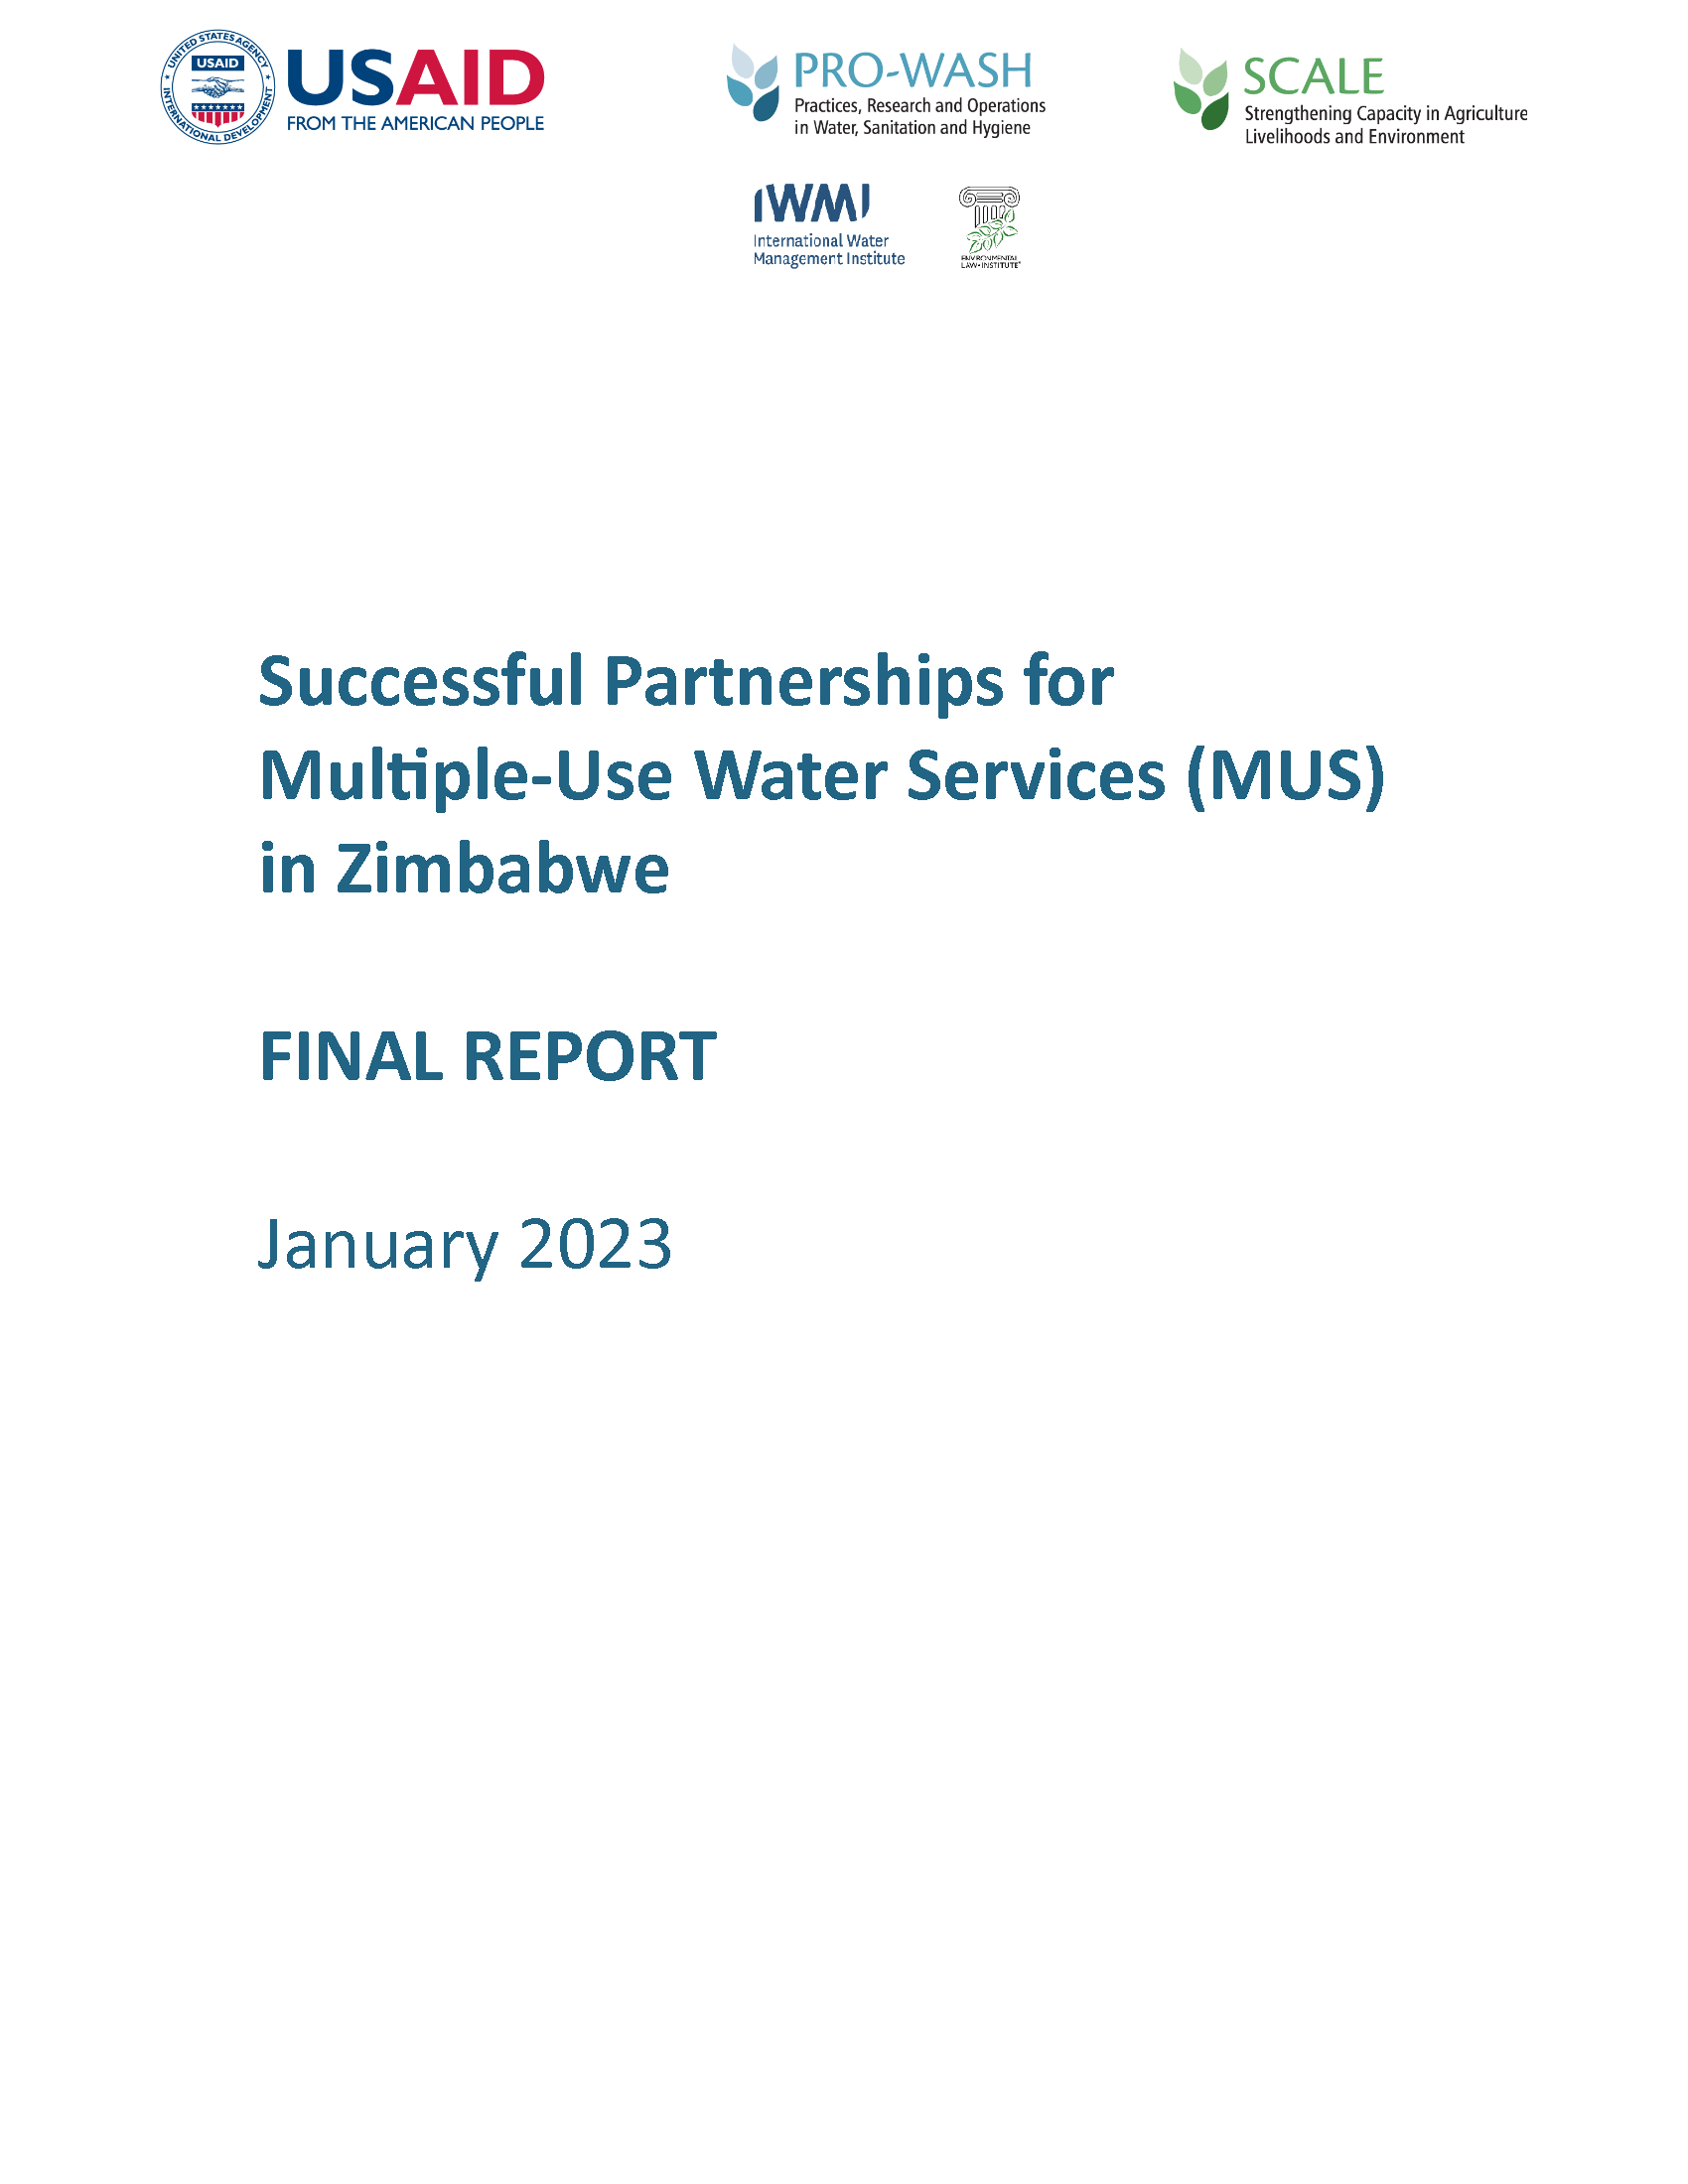 Cover page for Successful Partnerships for Multiple-Use Water Services (MUS) in Zimbabwe: Final Report